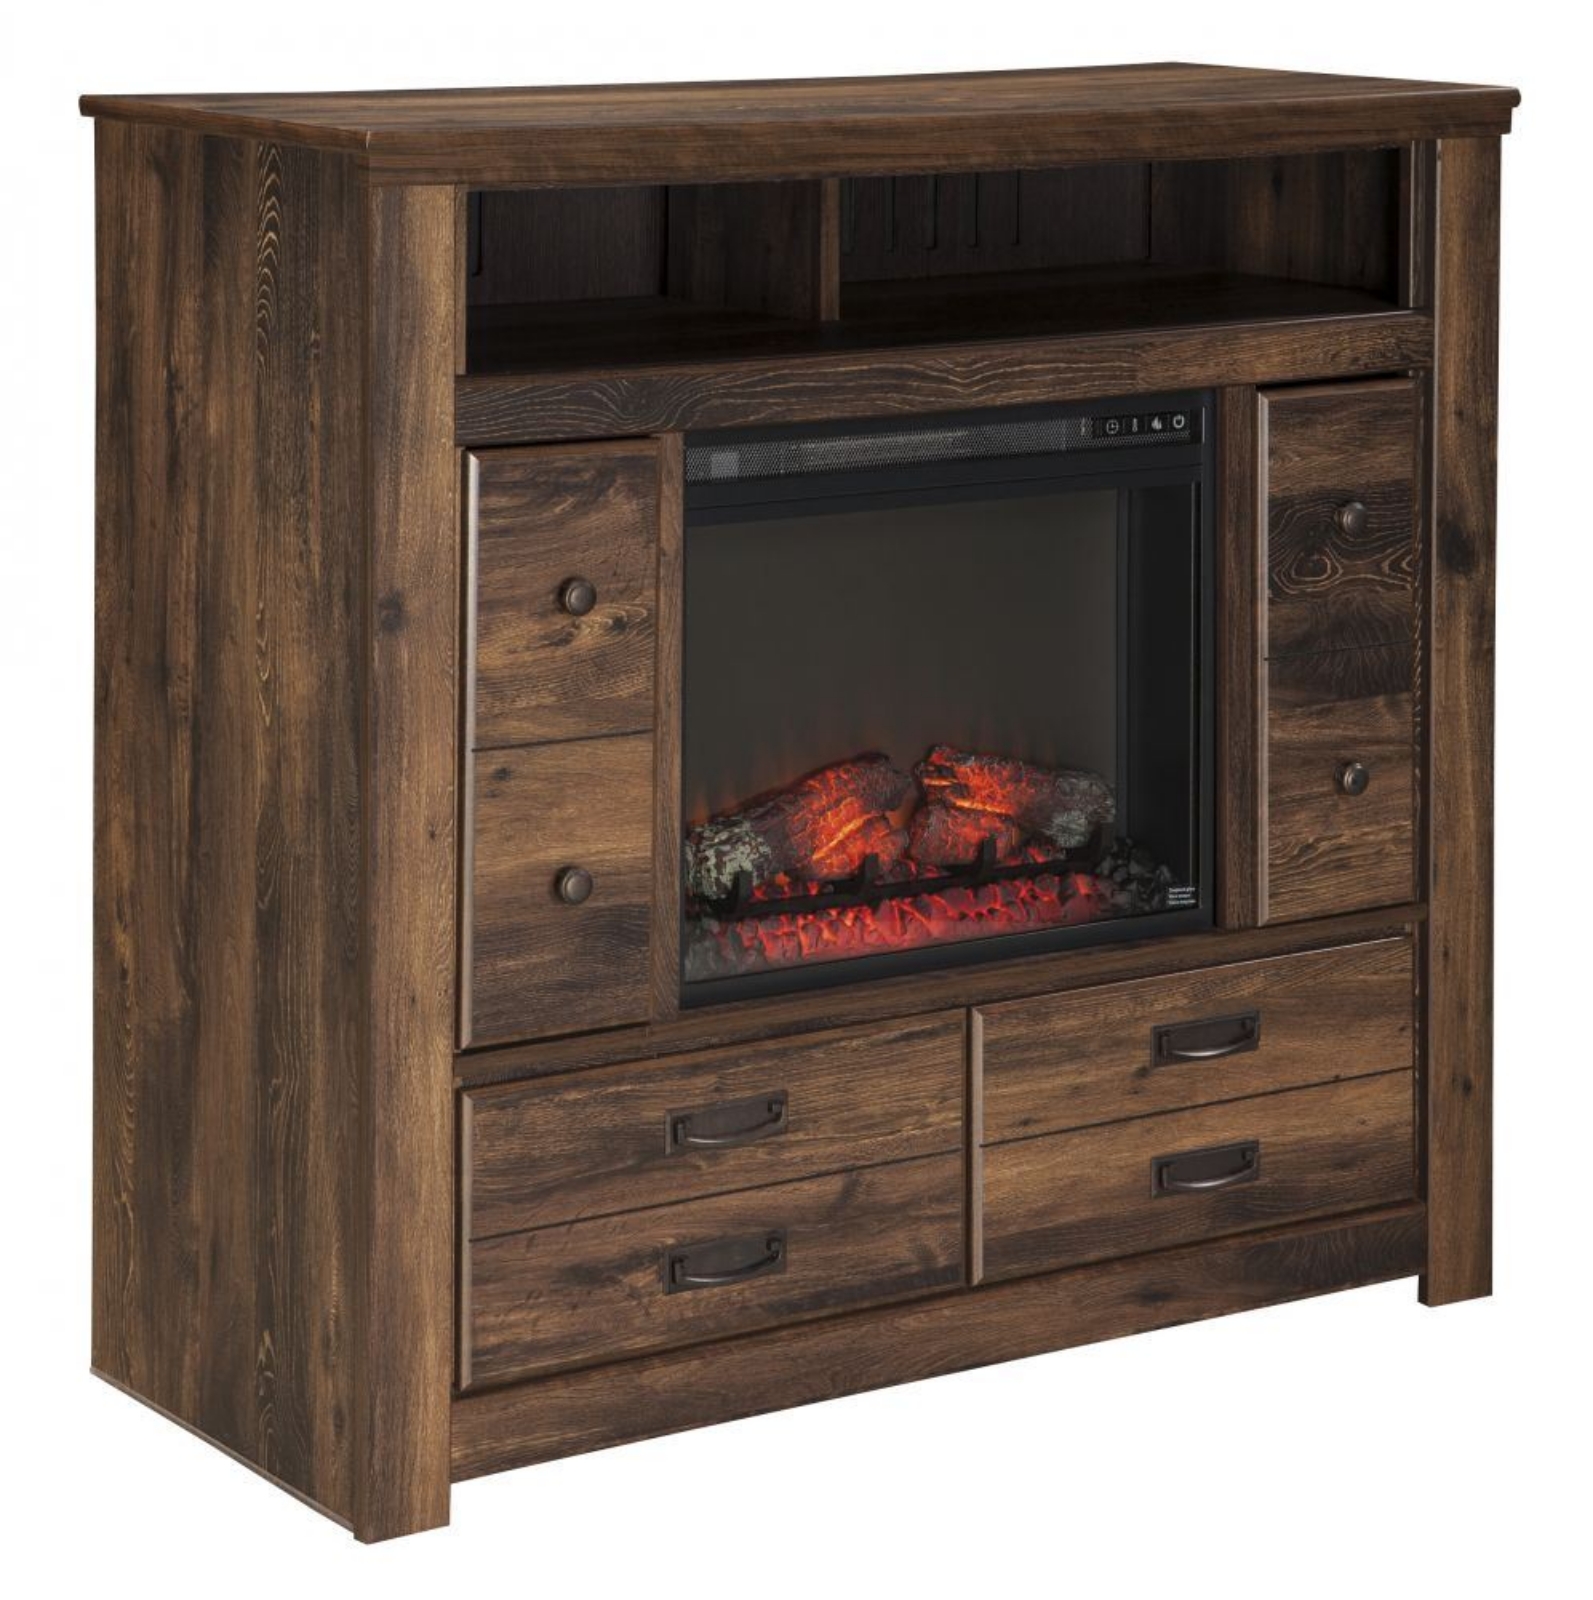 Picture of Quinden Media Chest with Fireplace